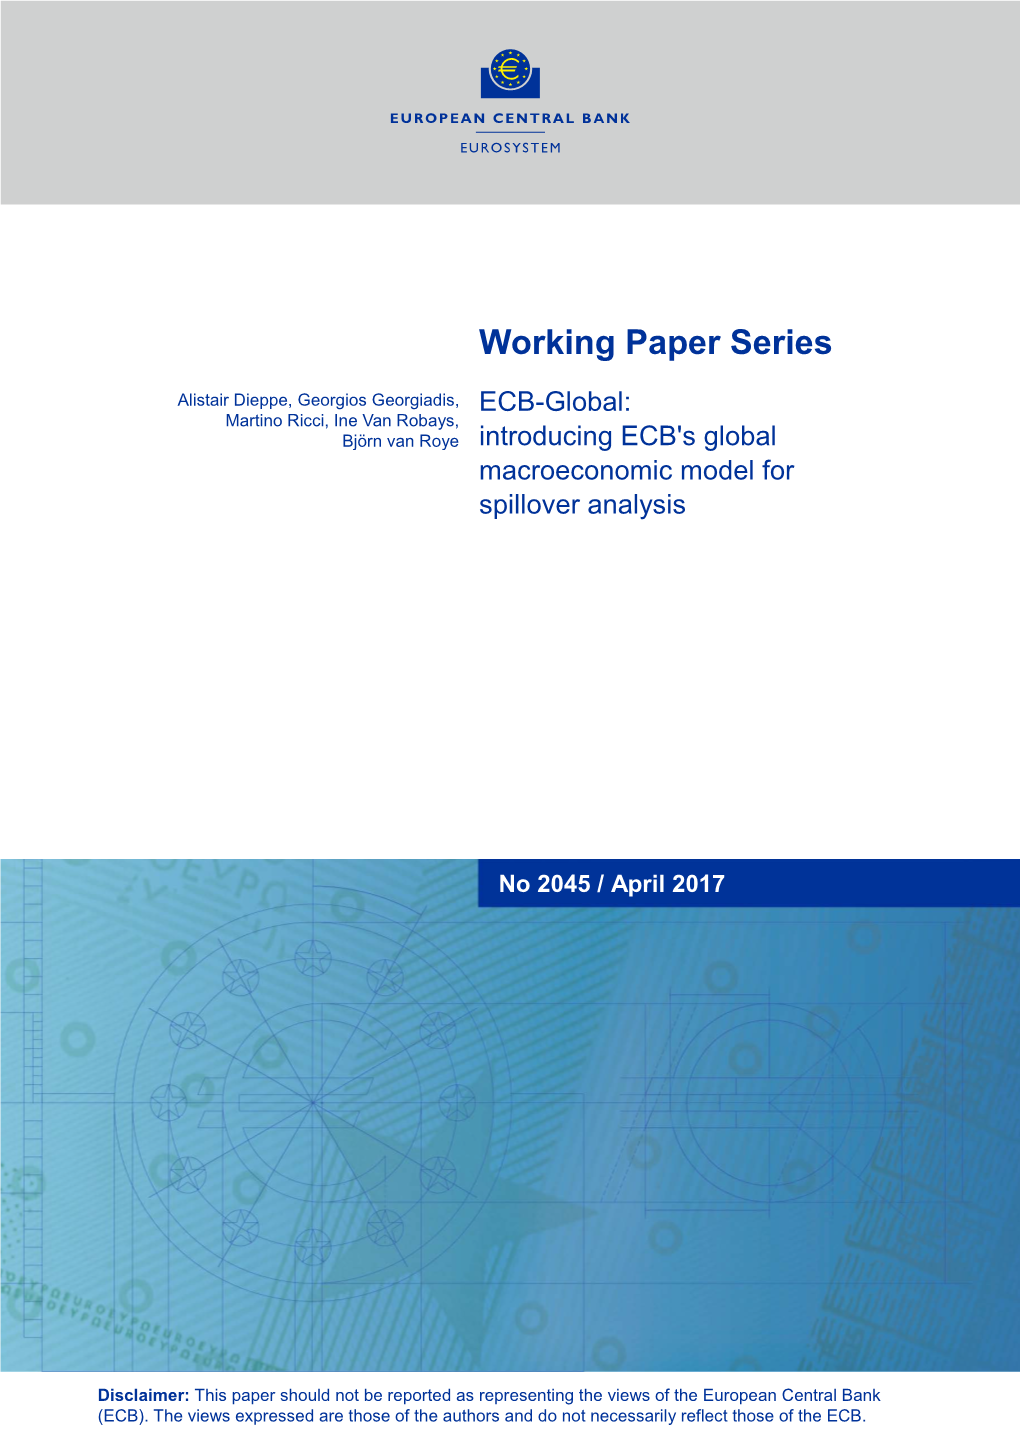 Introducing ECB's Global Macroeconomic Model for Spillover Analysis